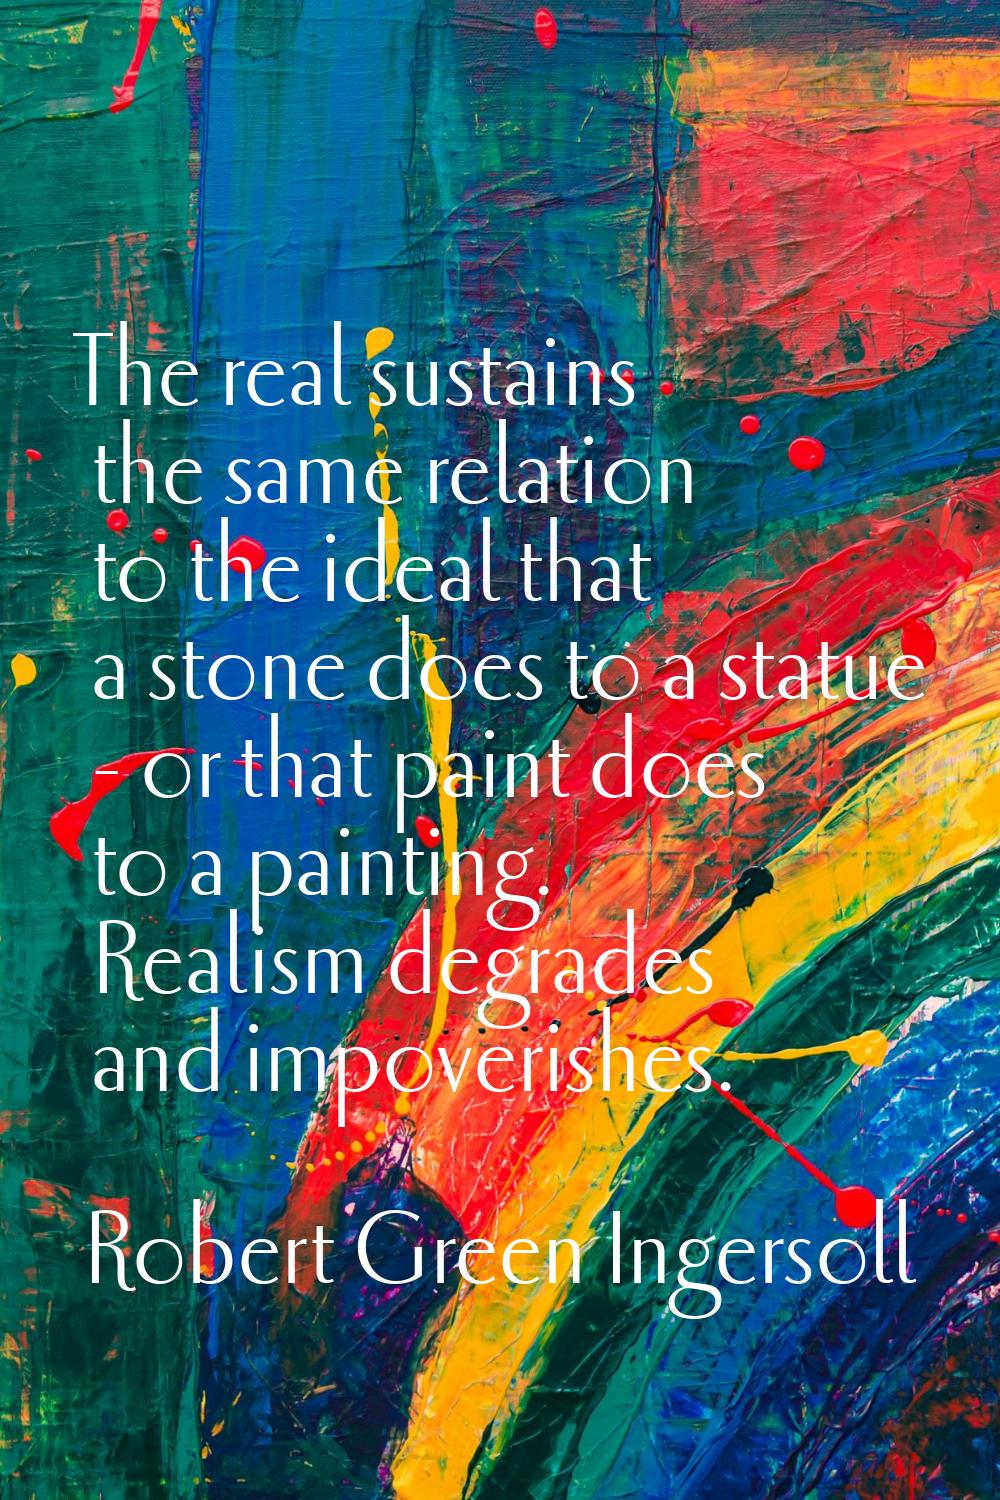 The real sustains the same relation to the ideal that a stone does to a statue - or that paint does